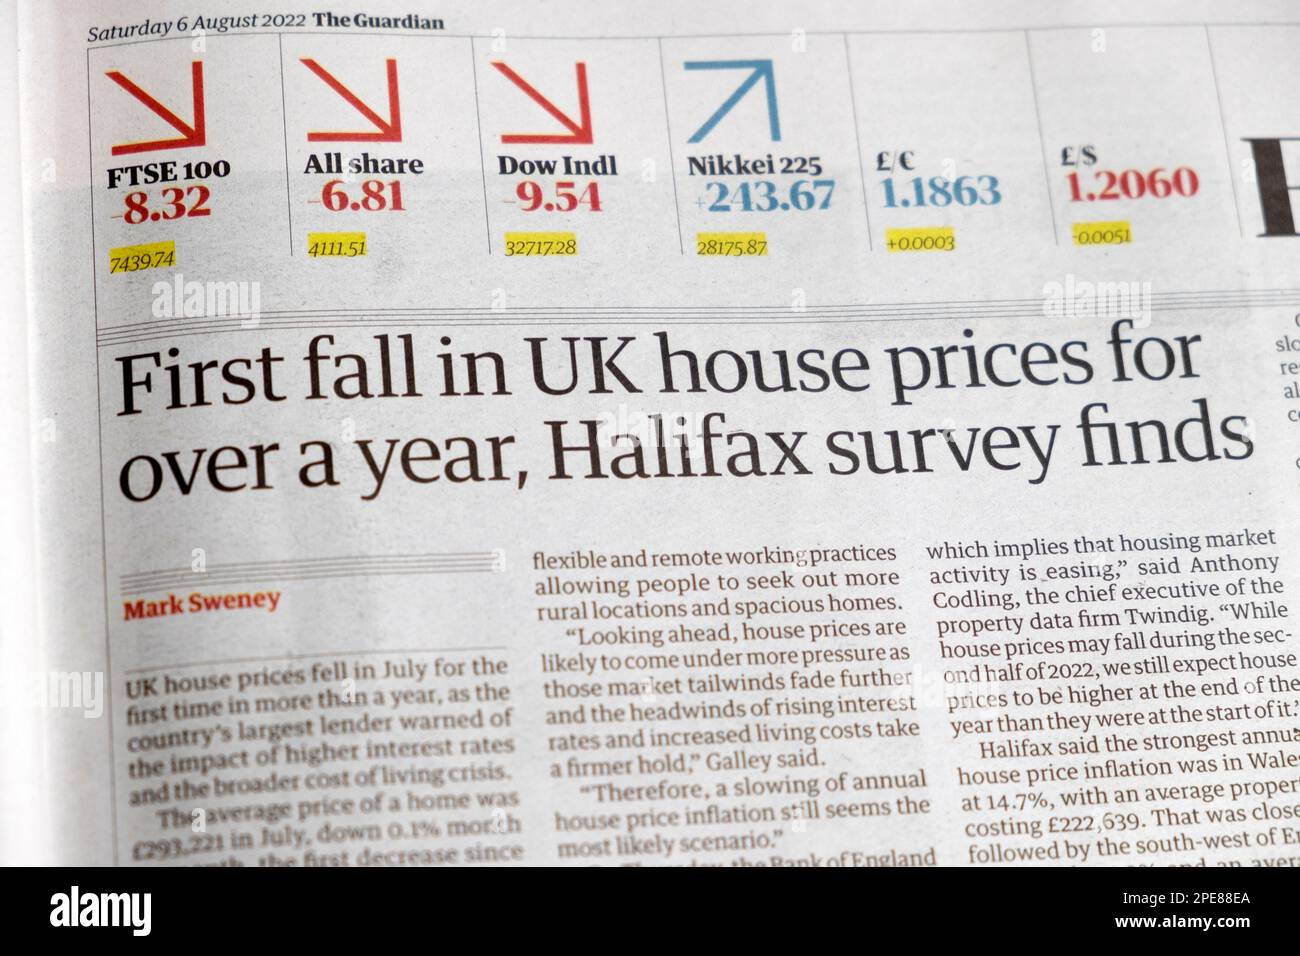 'First fall in UK house prices for over a year, Halifax survey finds' Guardian newspaper headline financial housing market article 6 August 2022 UK Stock Photo